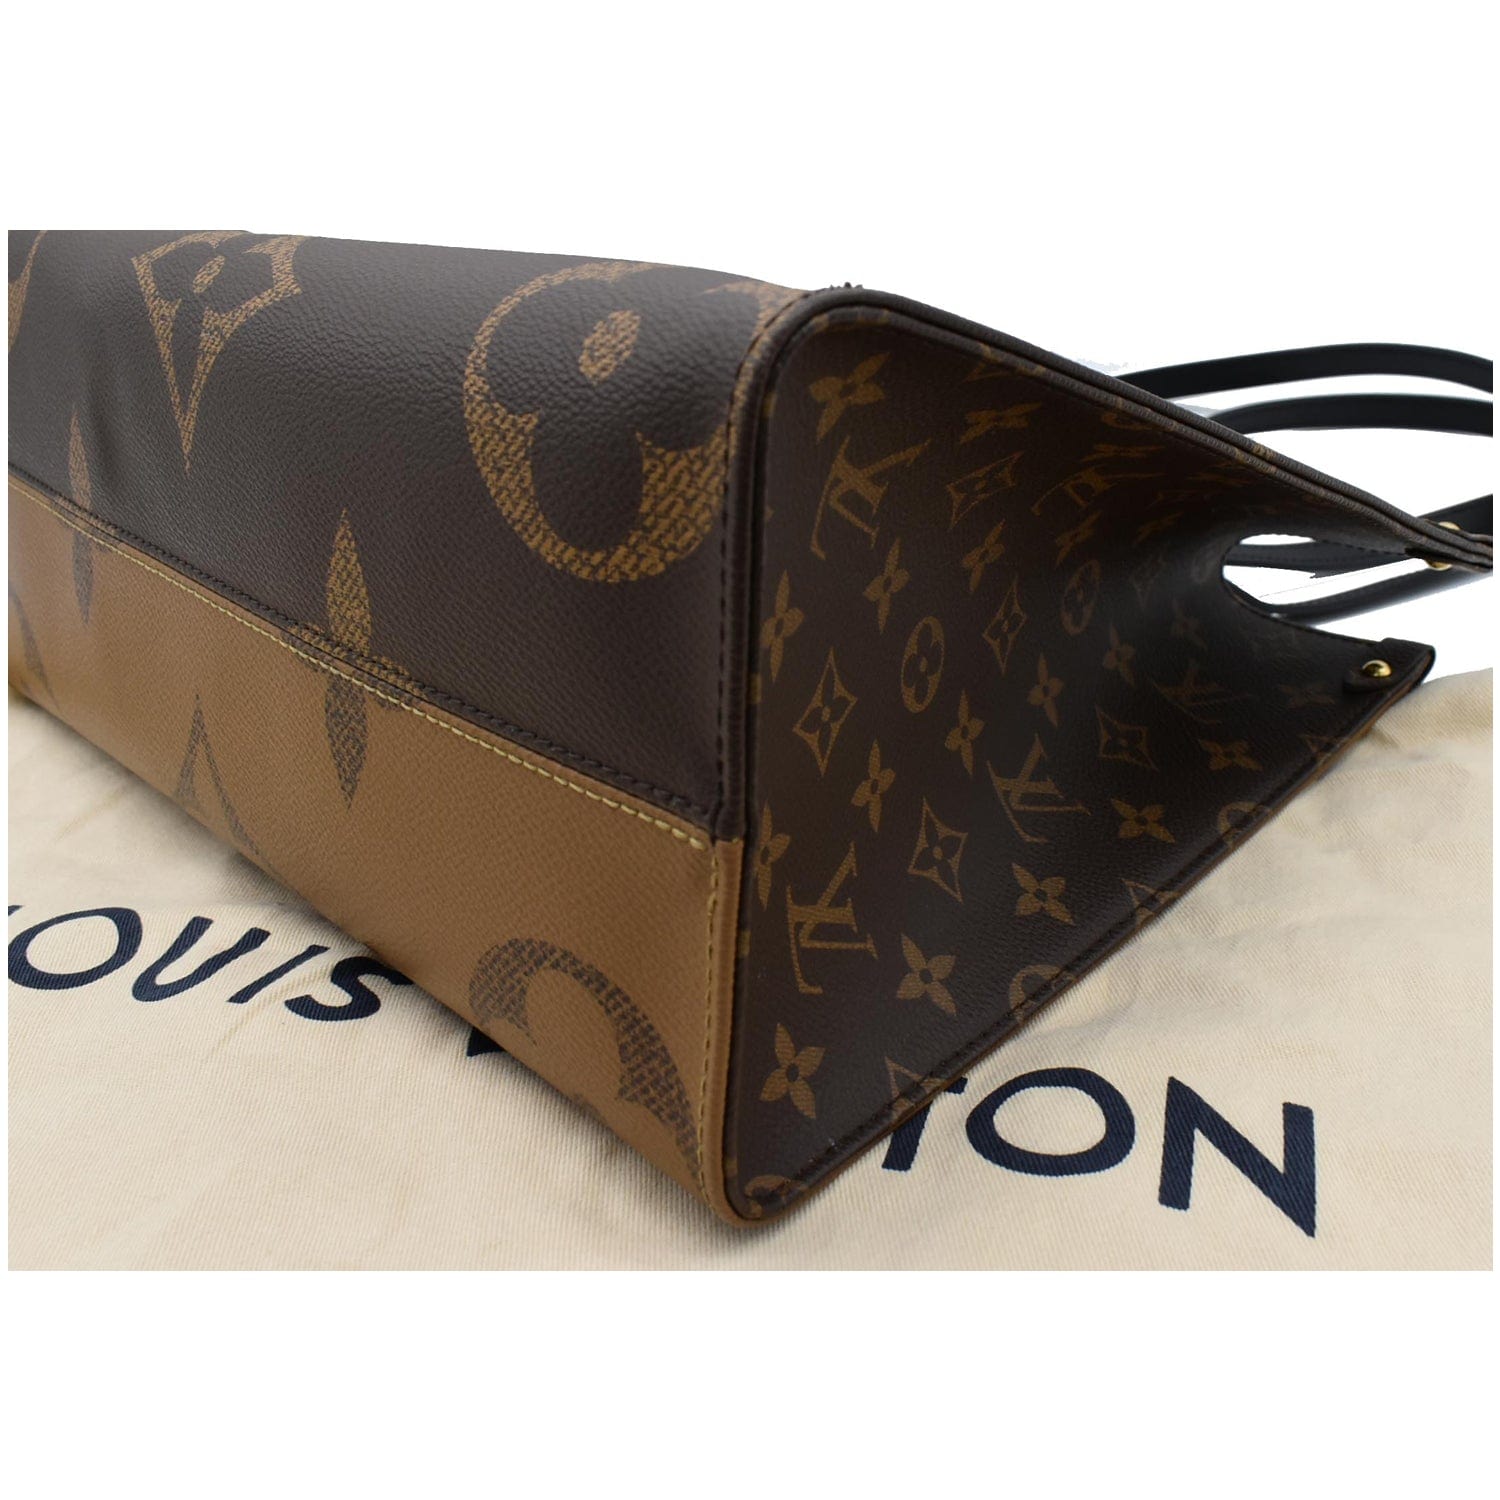 Louis Vuitton On The Go MM Tote, Brown Giant Monogram